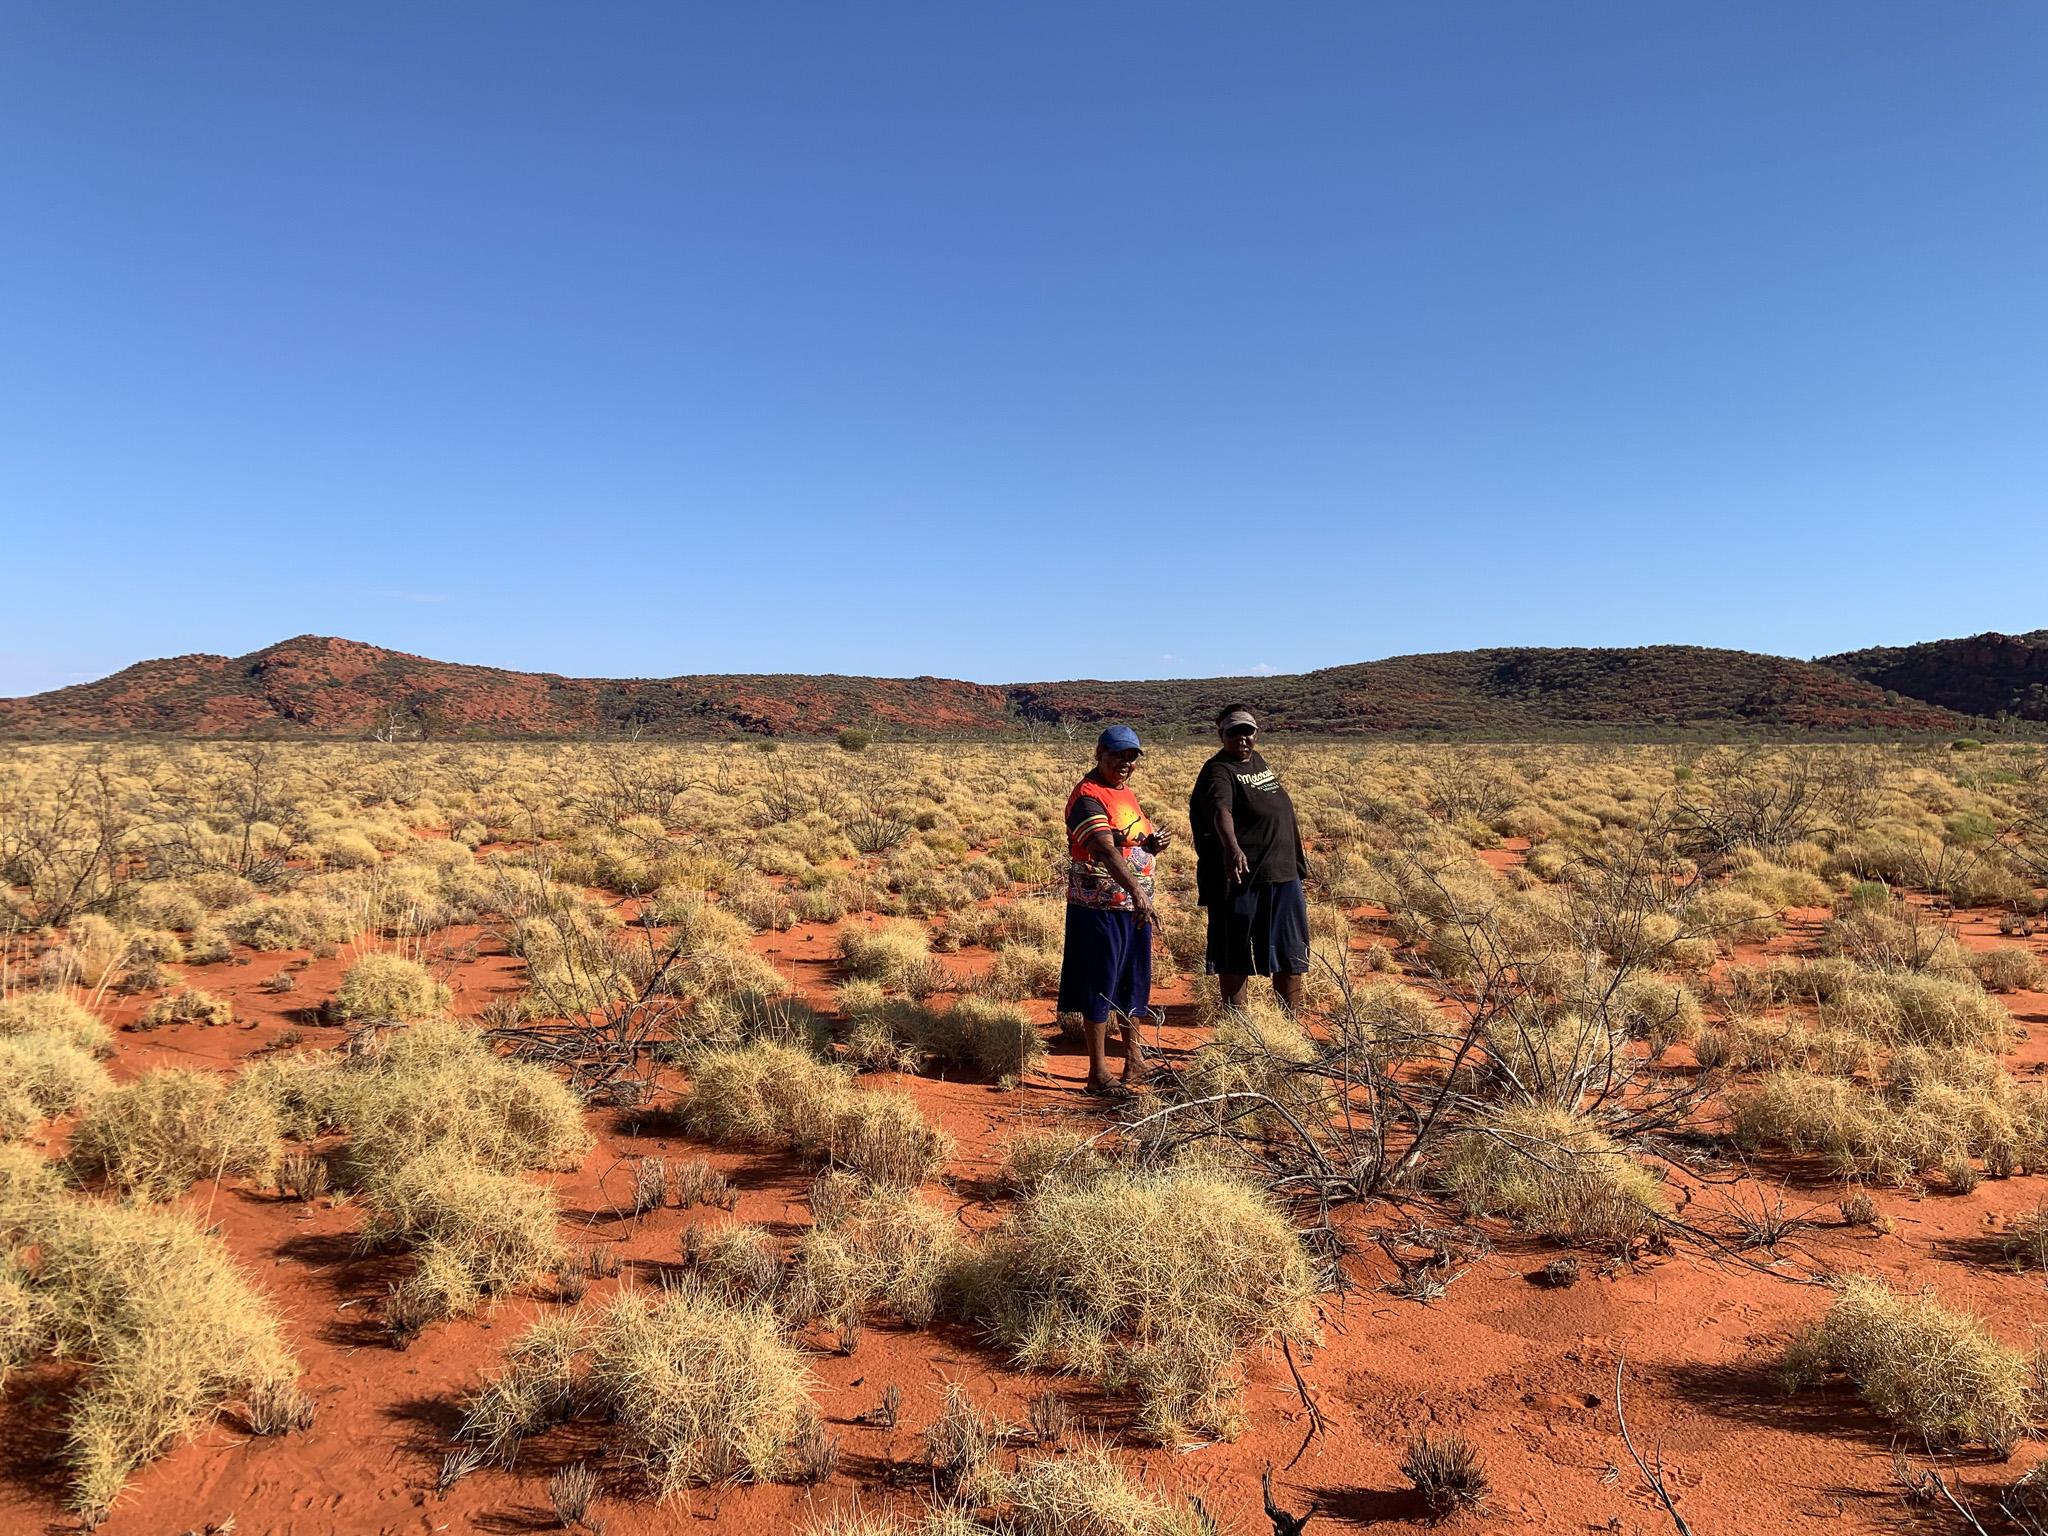 Two women stand in a desert, surrounded by spinifex, looking for burrows.